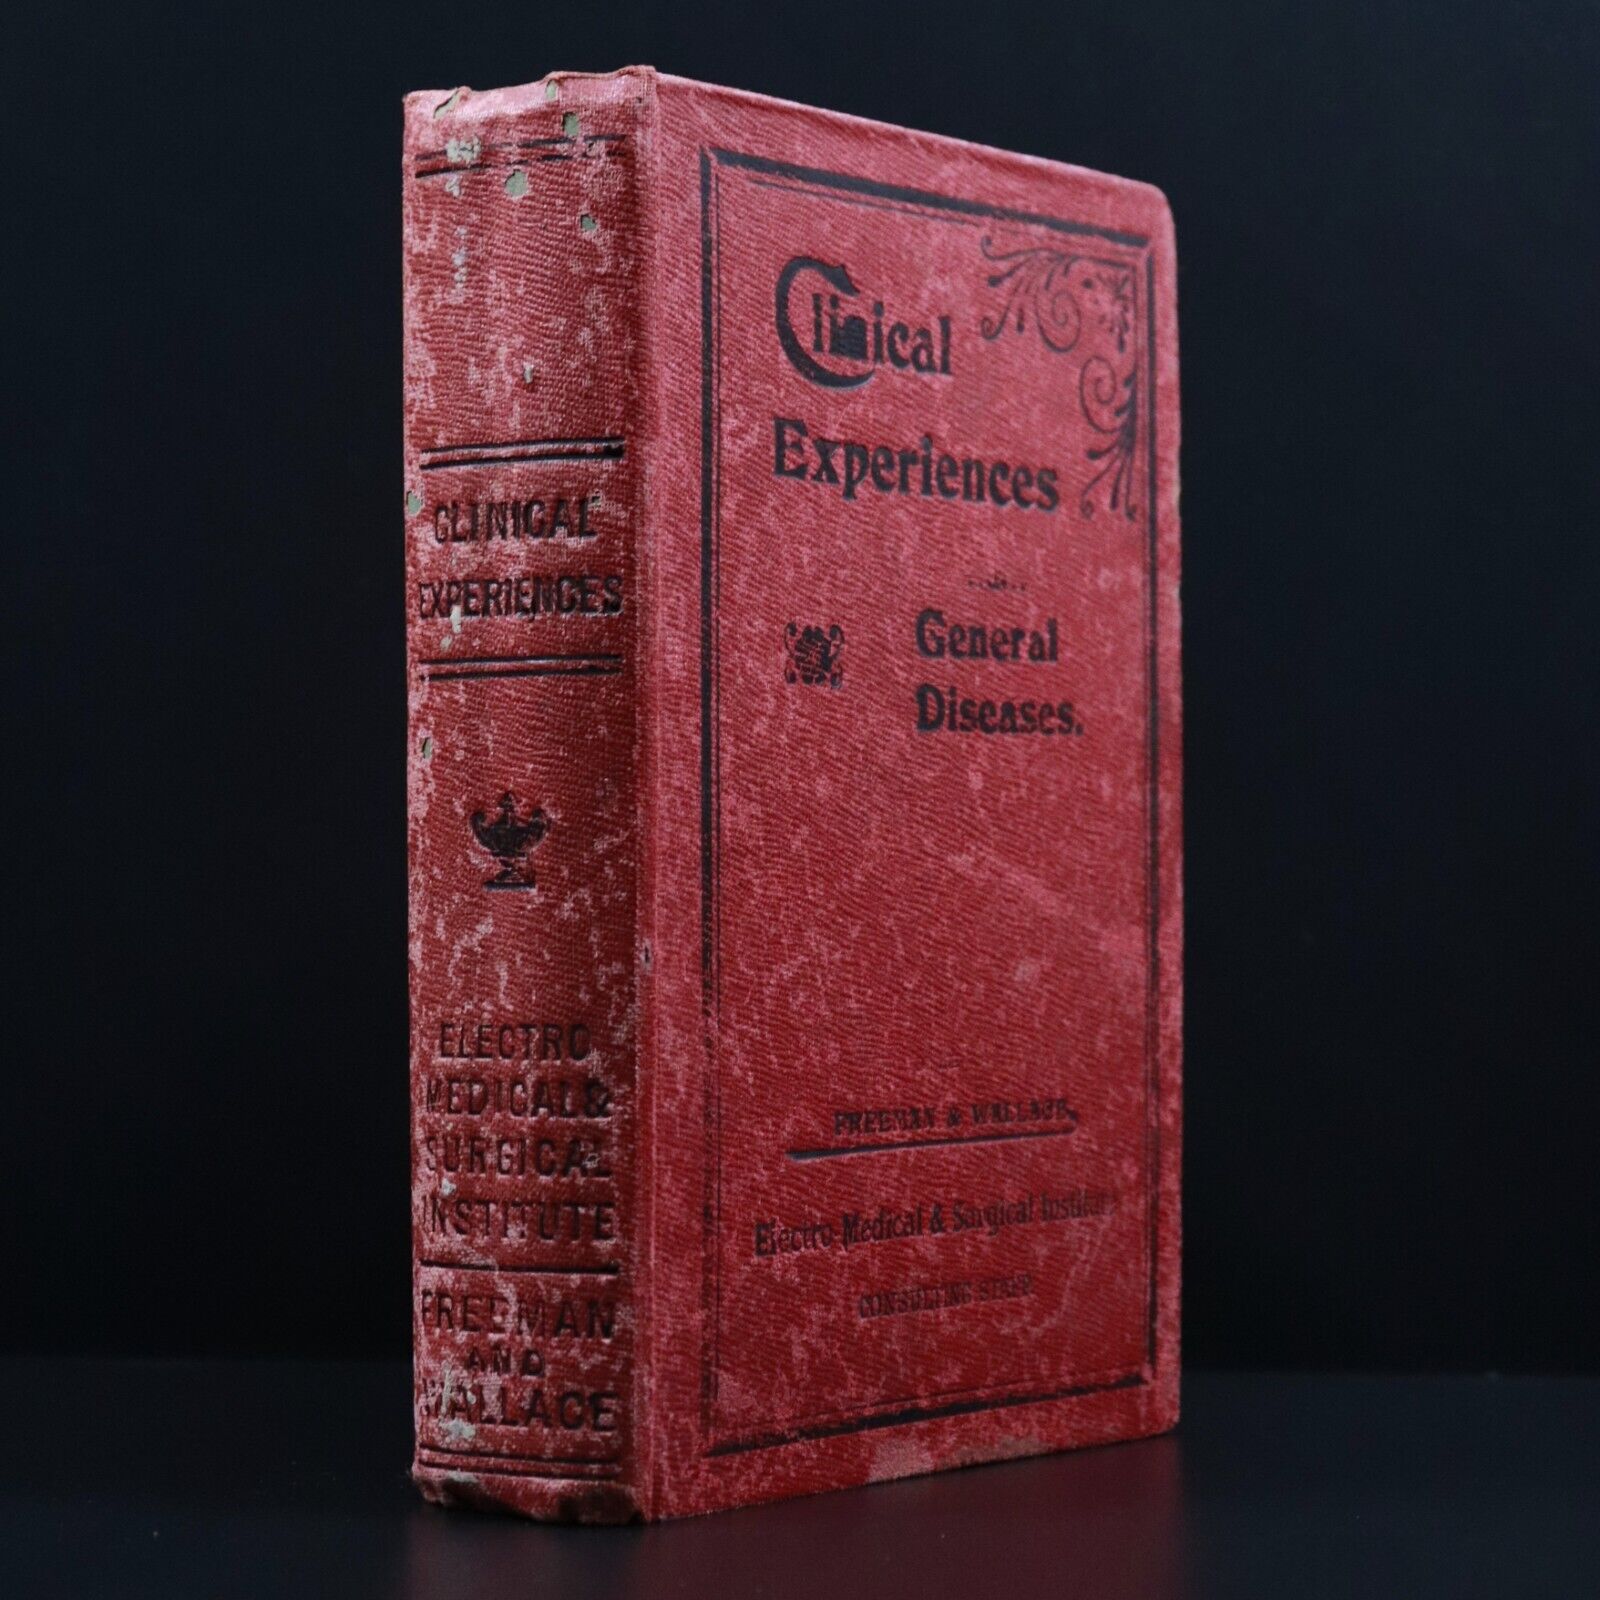 c1902 Clinical Experiences Of Nervous & Chronic Diseases Australian Medical Book